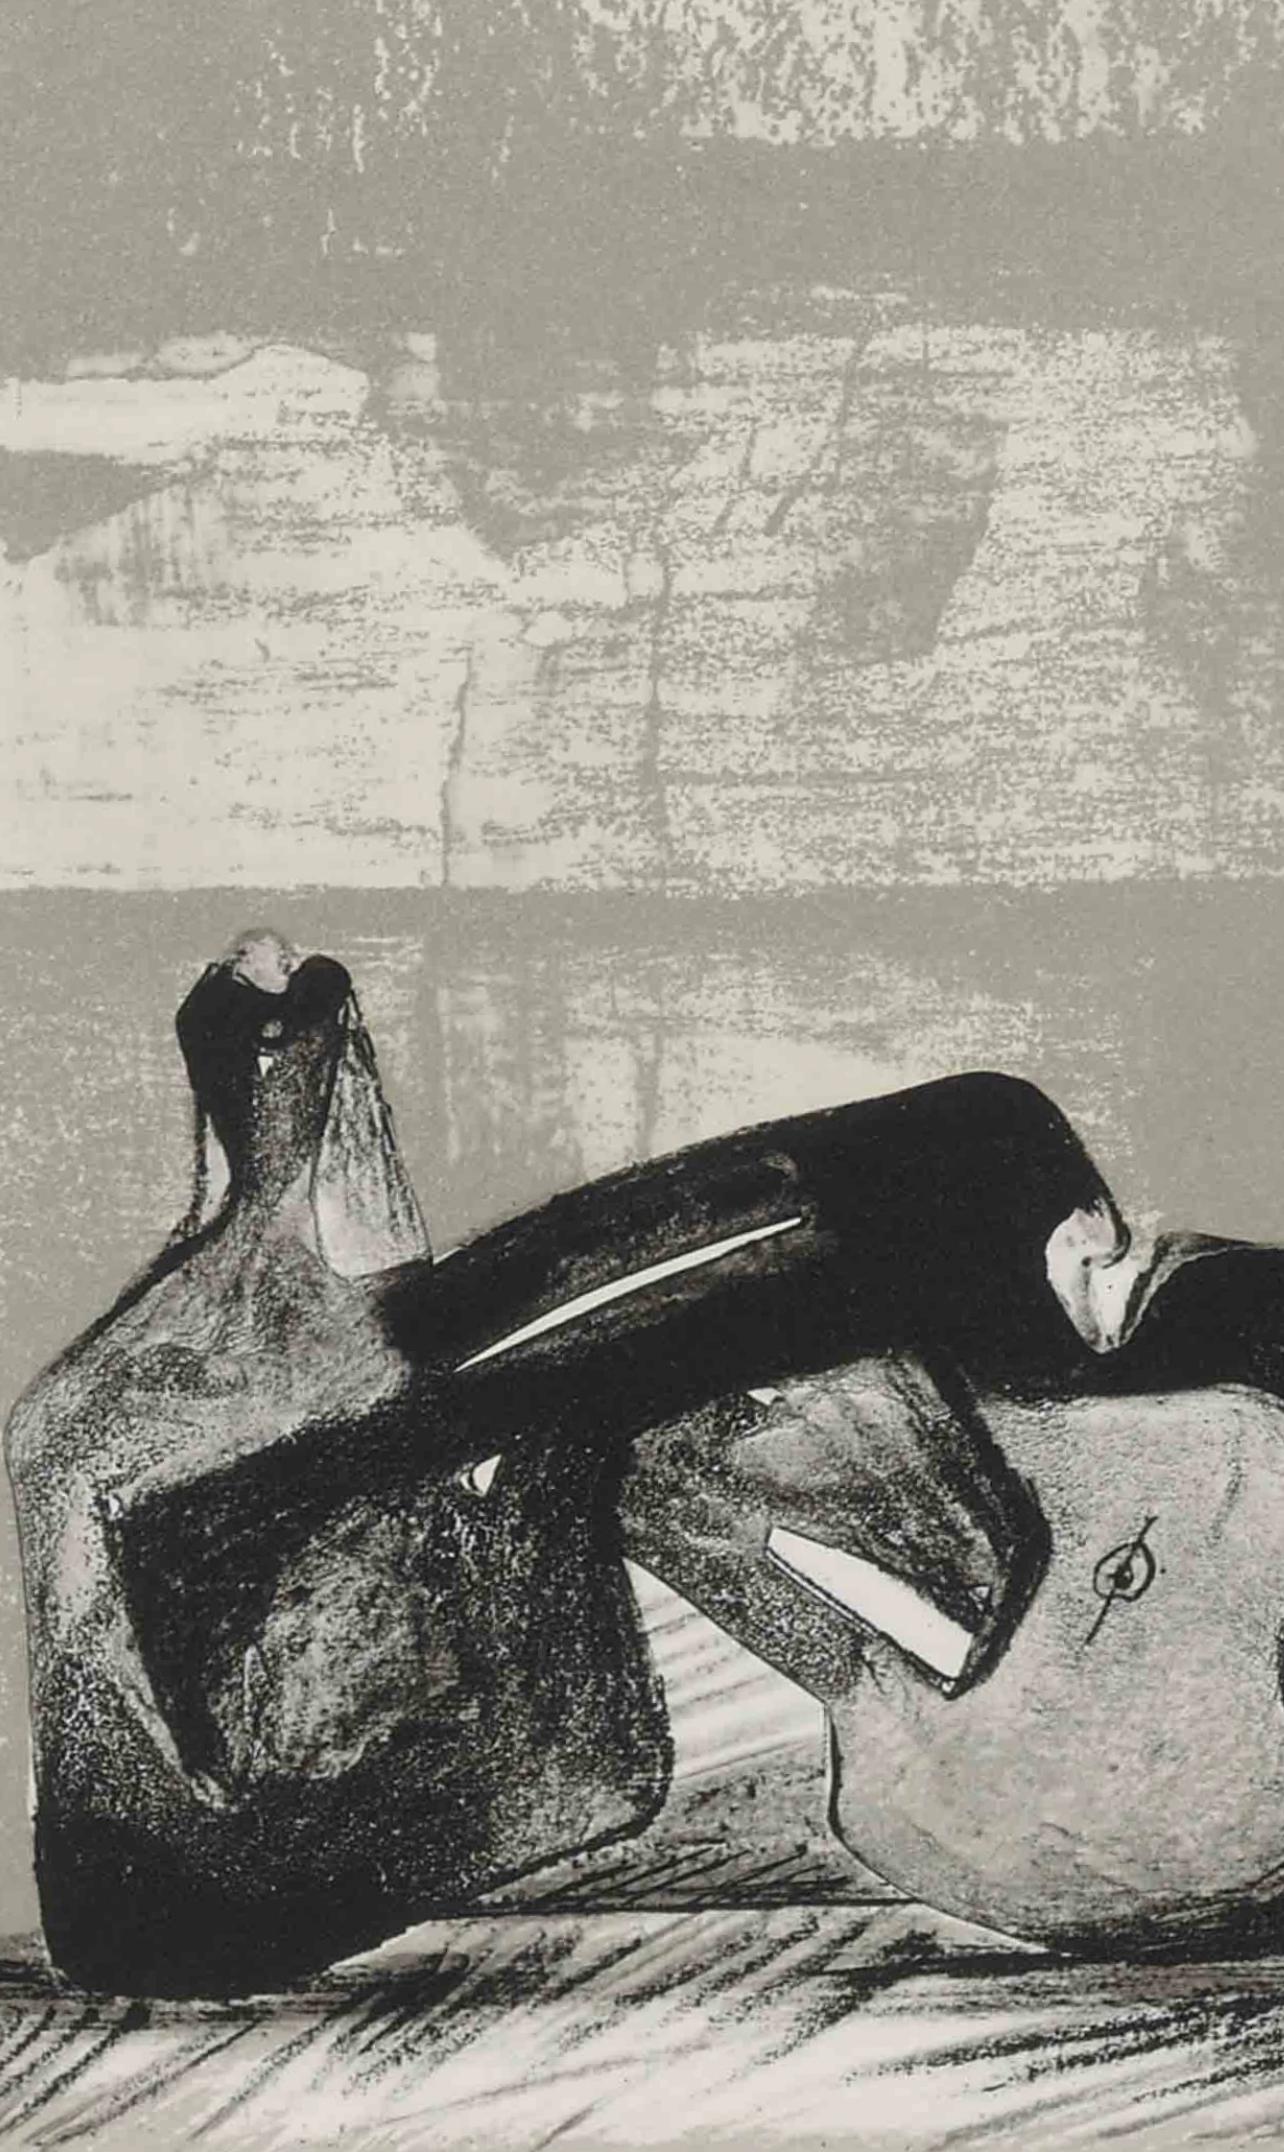 Moore, Reclining Figure, Interior Setting I (Cramer 458), XXe Siècle (after) - Modern Print by Henry Moore